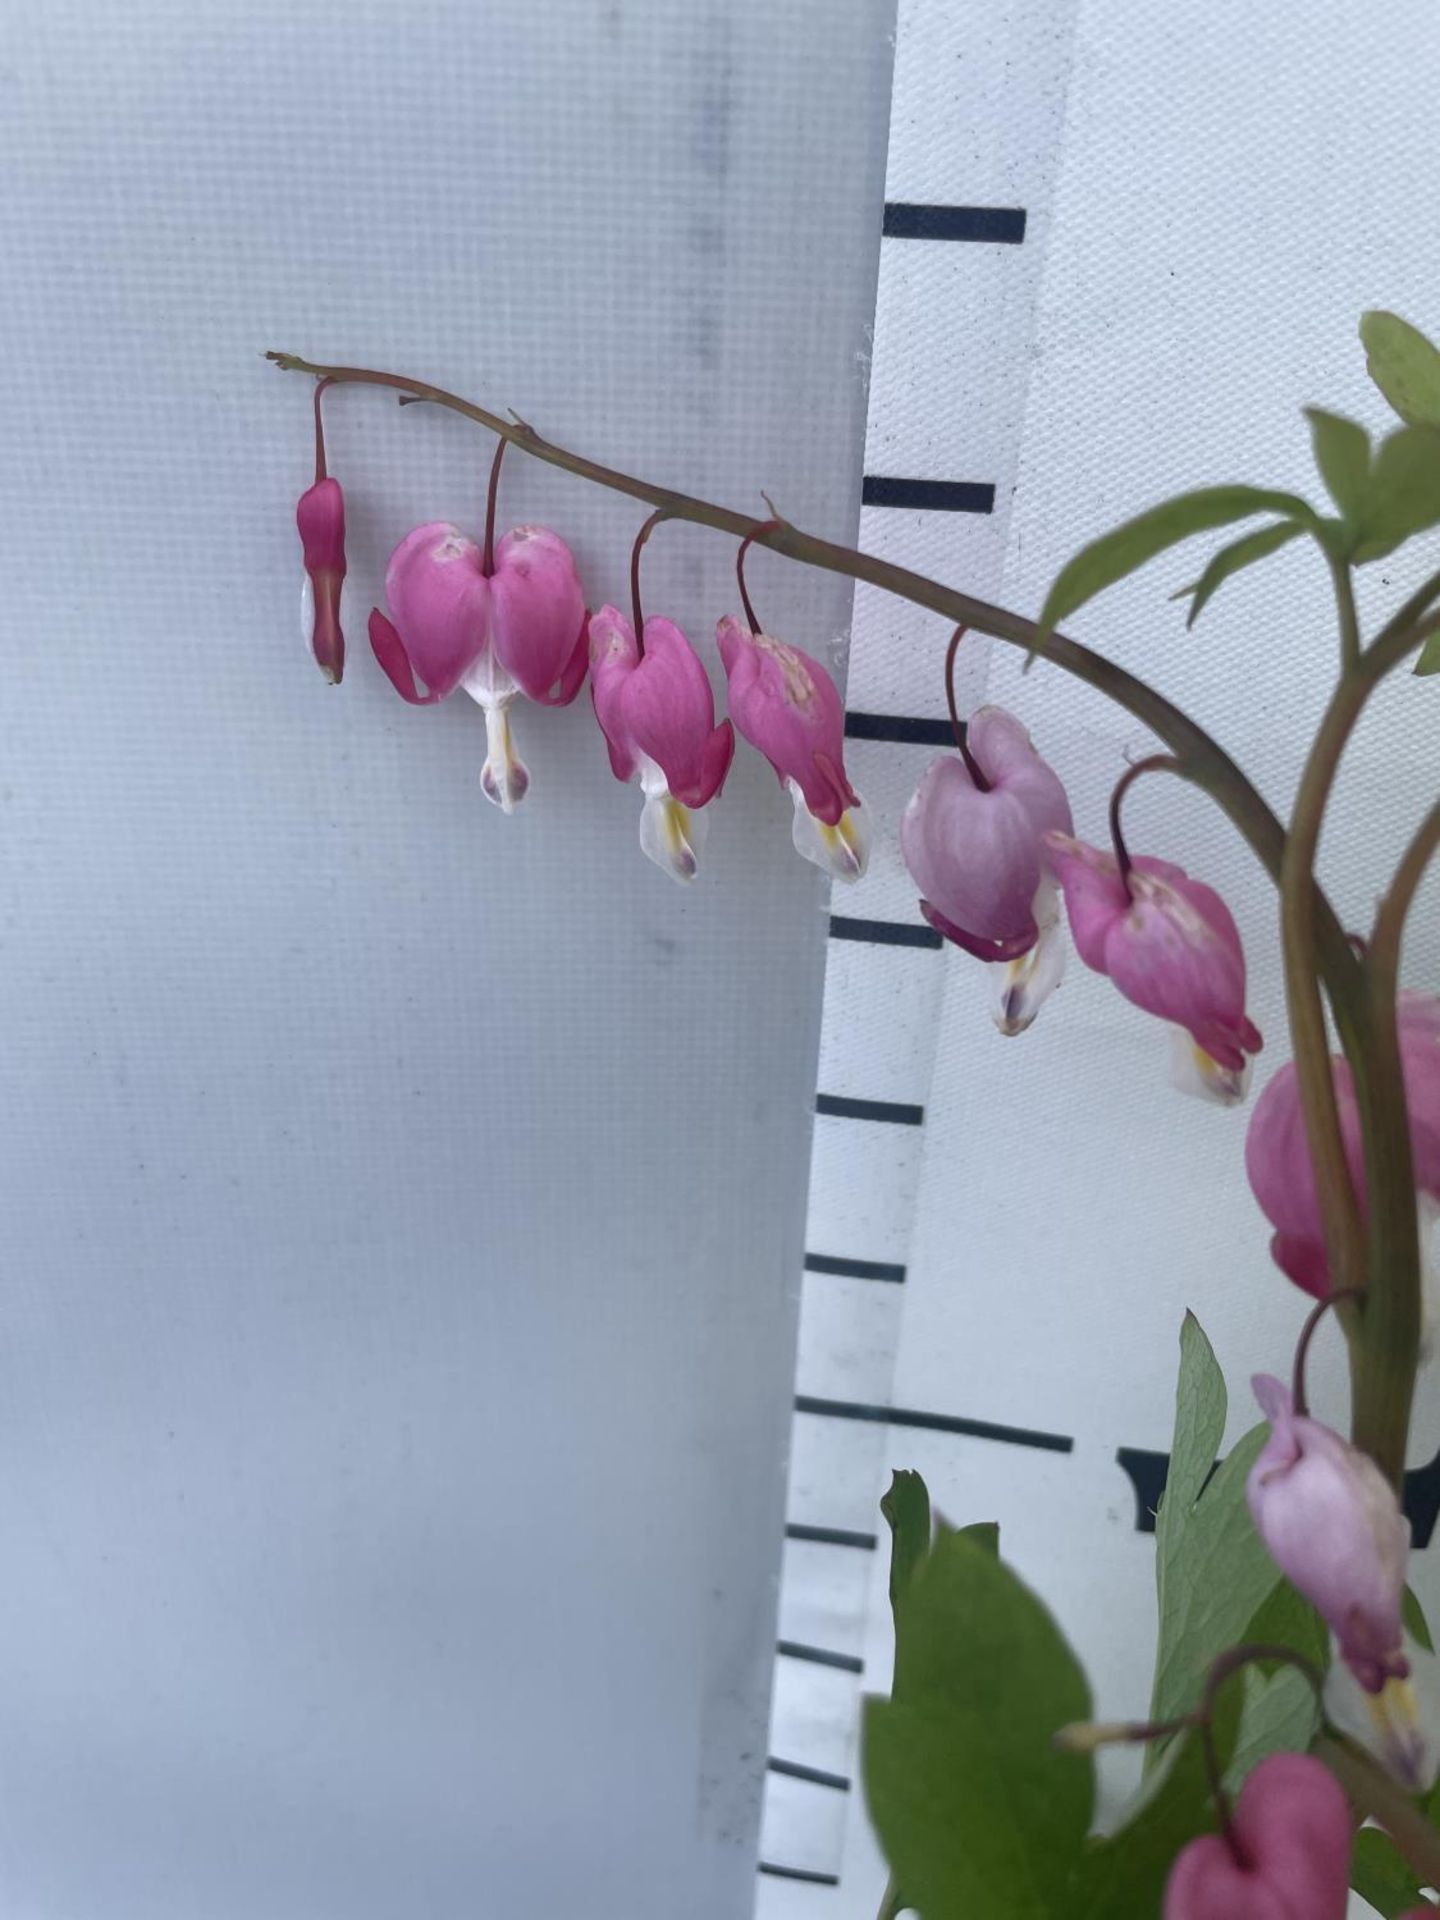 SIX DICENTRA SPECTABILIS BLEEDING HEART 50CM TALL IN 2 LTR POTS TO BE SOLD FOR THE SIX PLUS VAT - Image 7 of 11